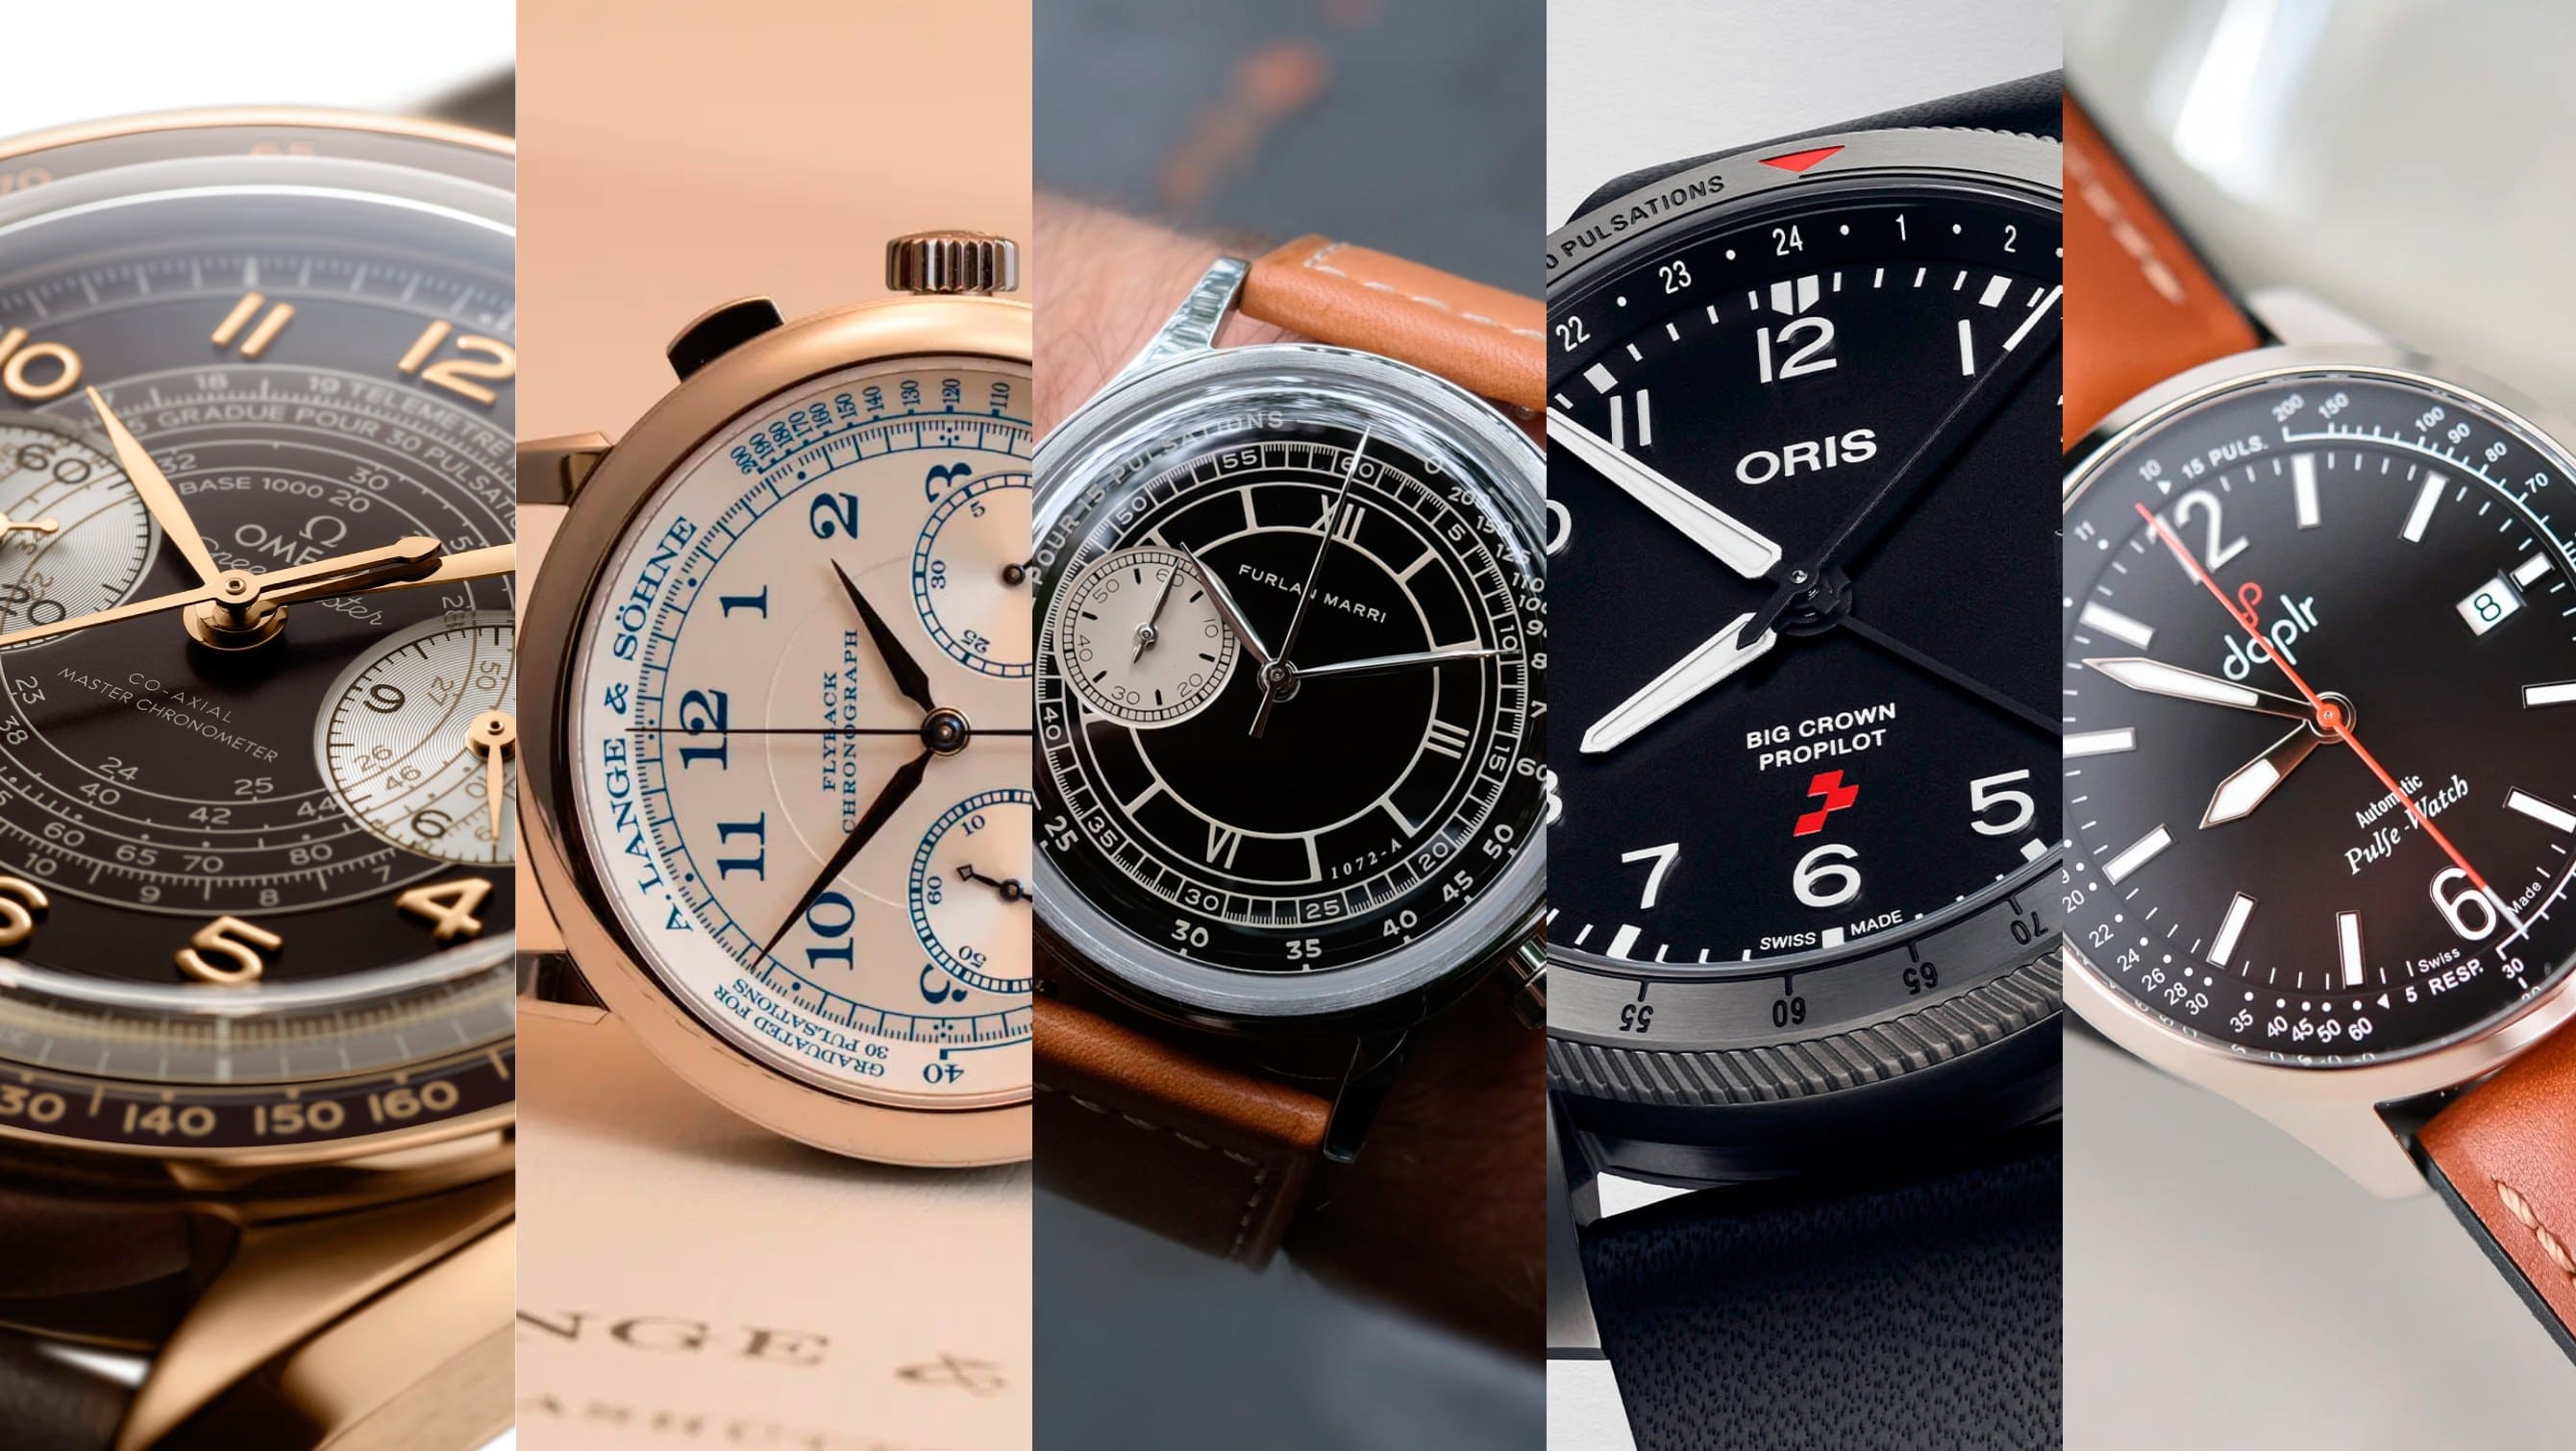 The 5 best pulsometer watches